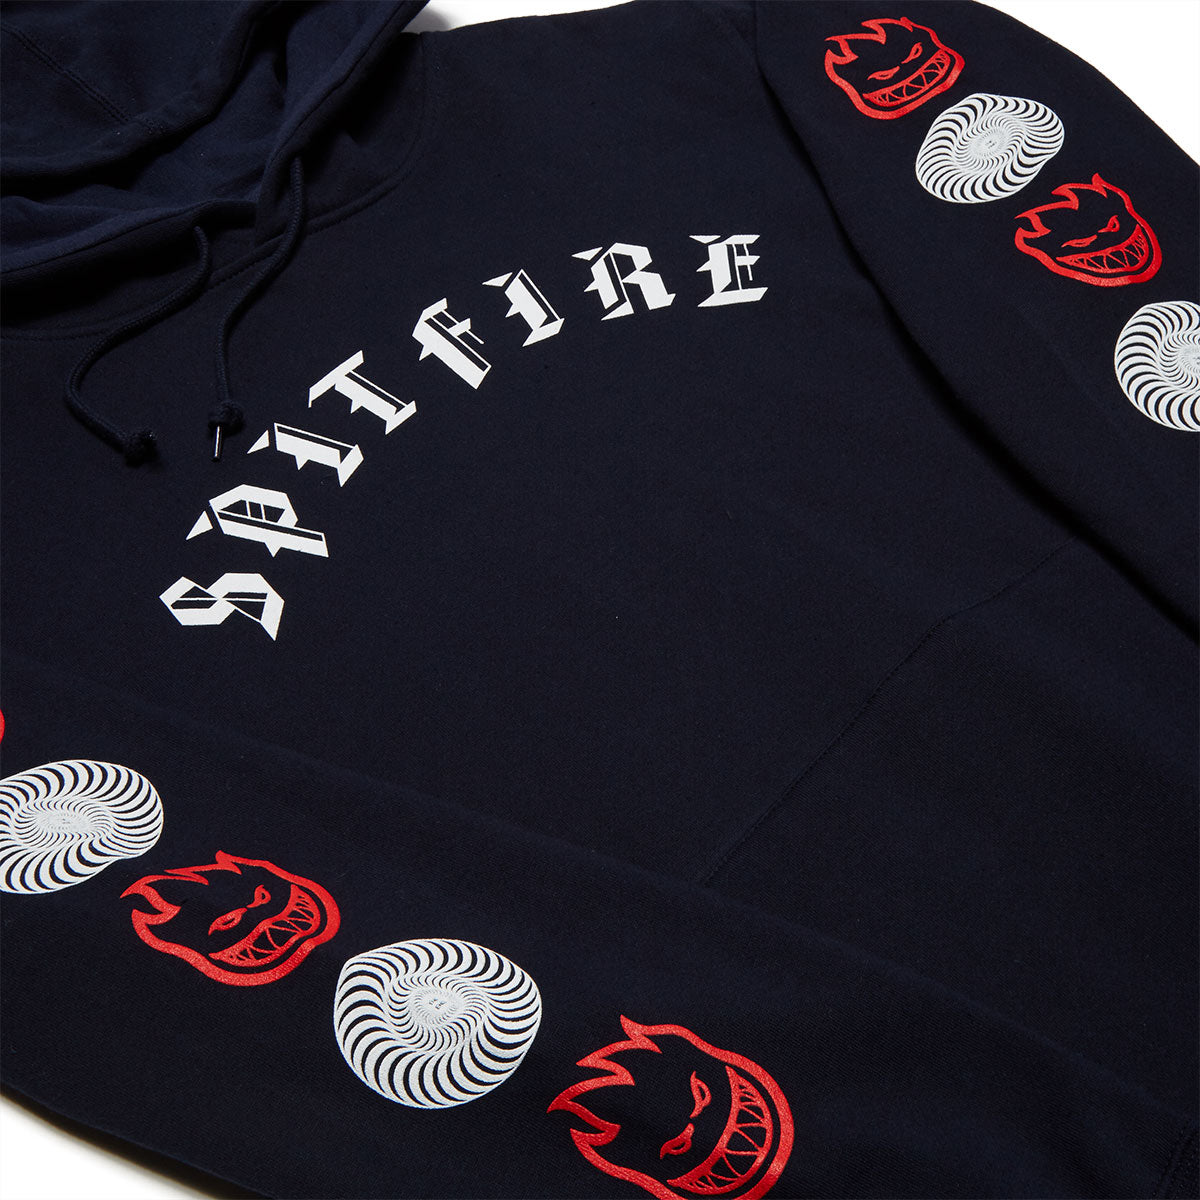 Spitfire Old E Combo Sleeve Hoodie - Navy/White/Red image 2